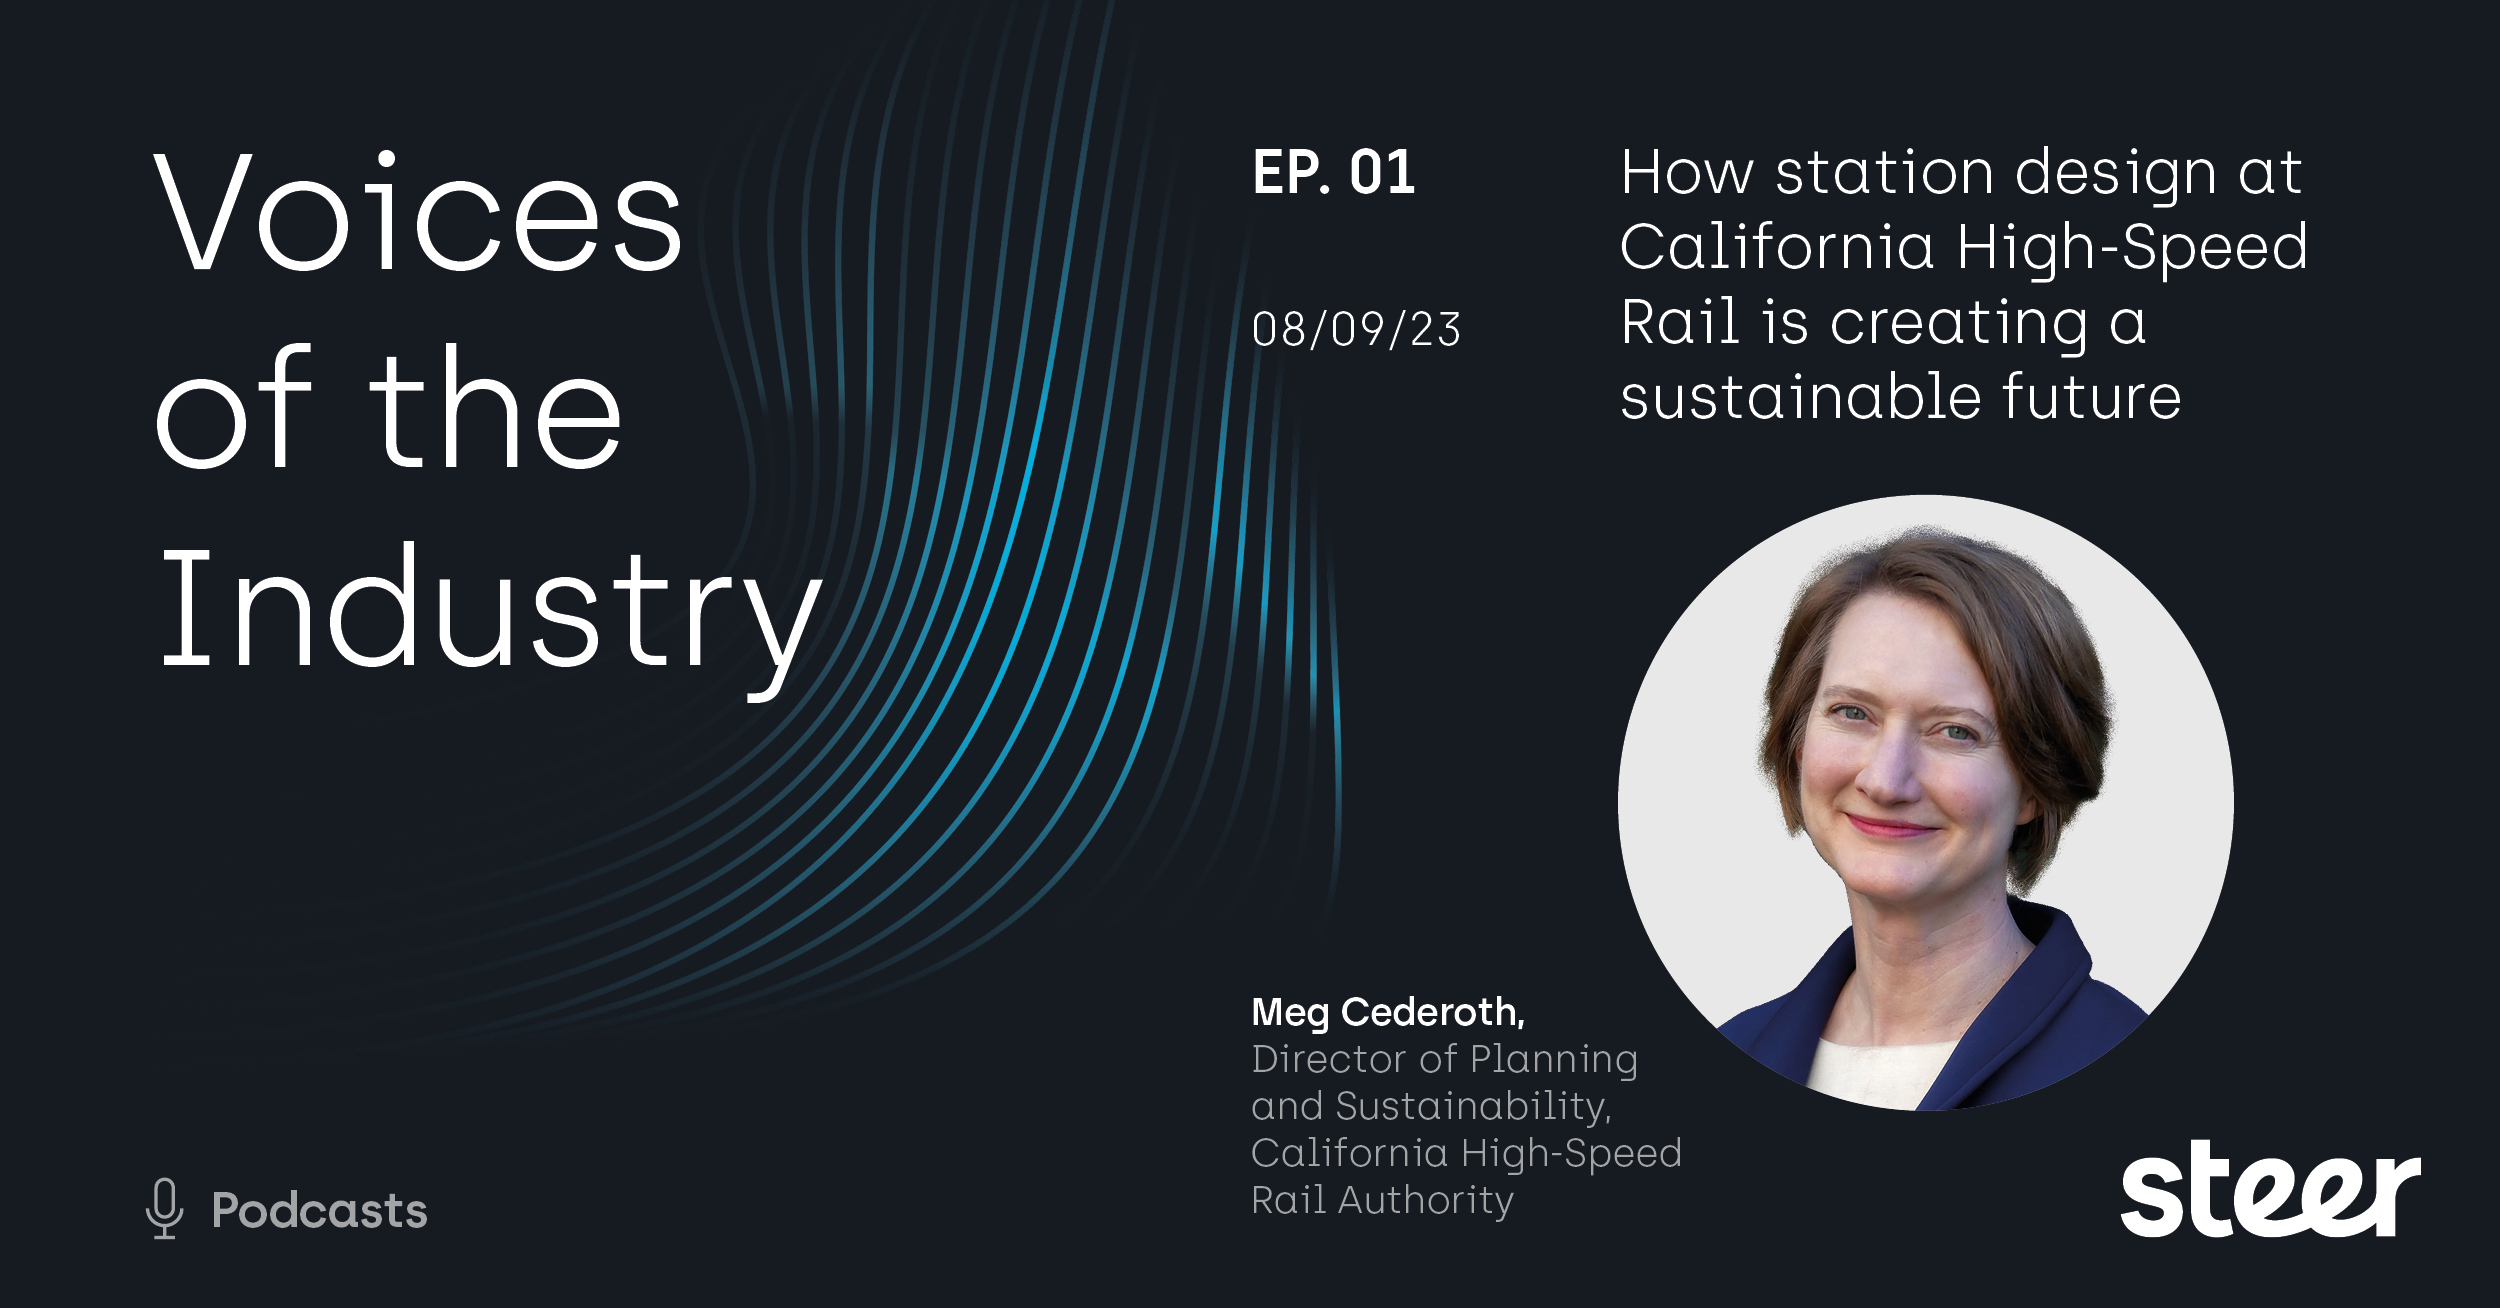 How station design at California High-Speed Rail is creating a sustainable future with Meg Cederoth